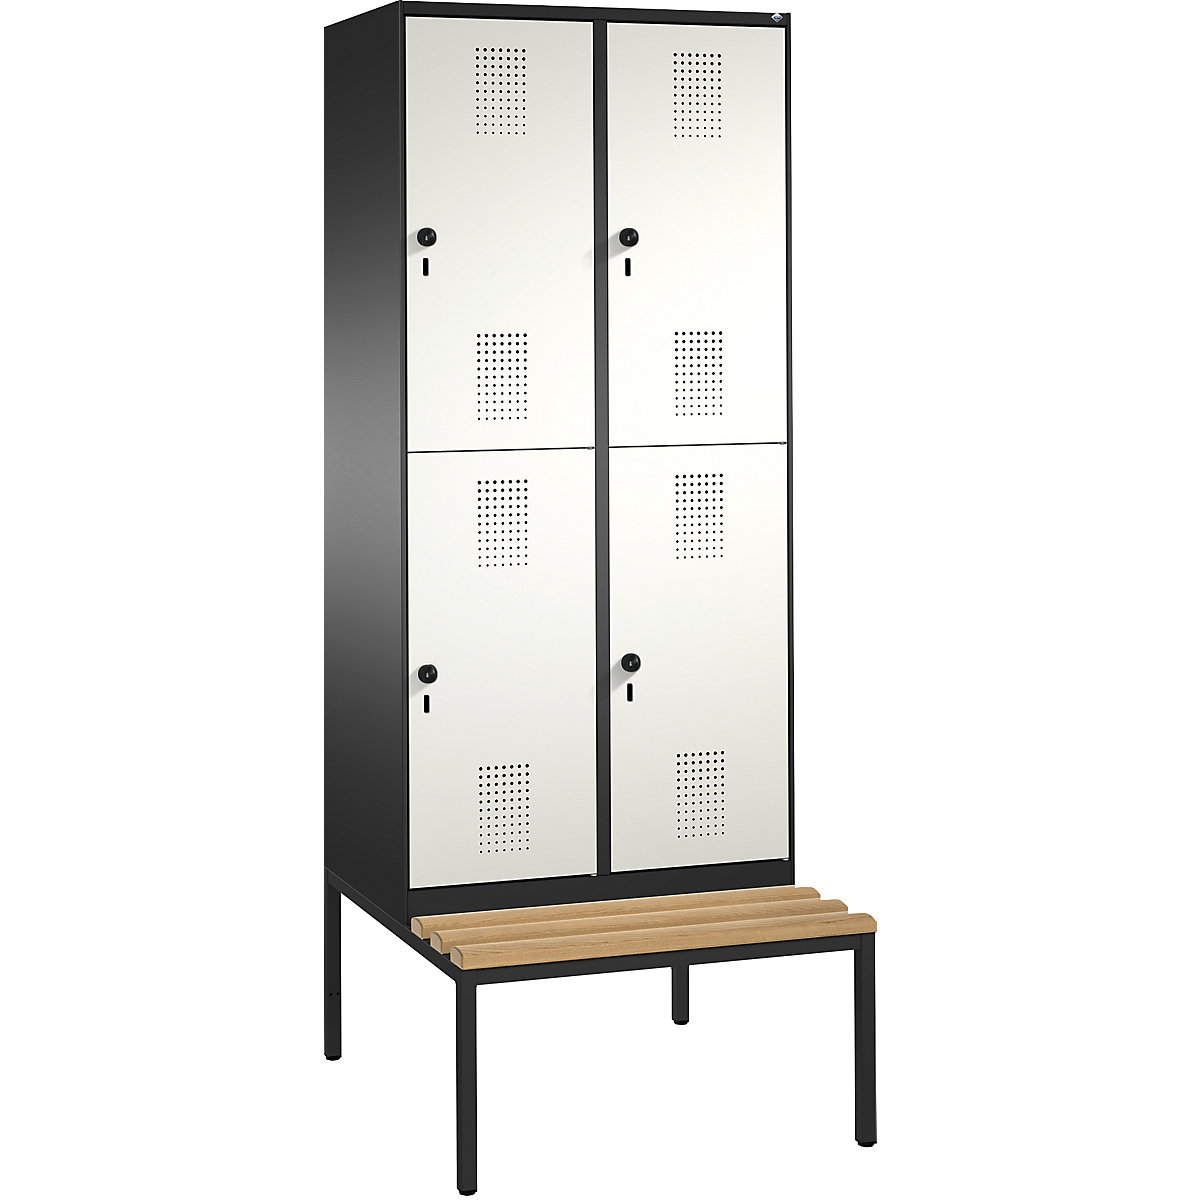 EVOLO cloakroom locker, double tier, with bench – C+P, 2 compartments, 2 shelf compartments each, compartment width 400 mm, black grey / pure white-3